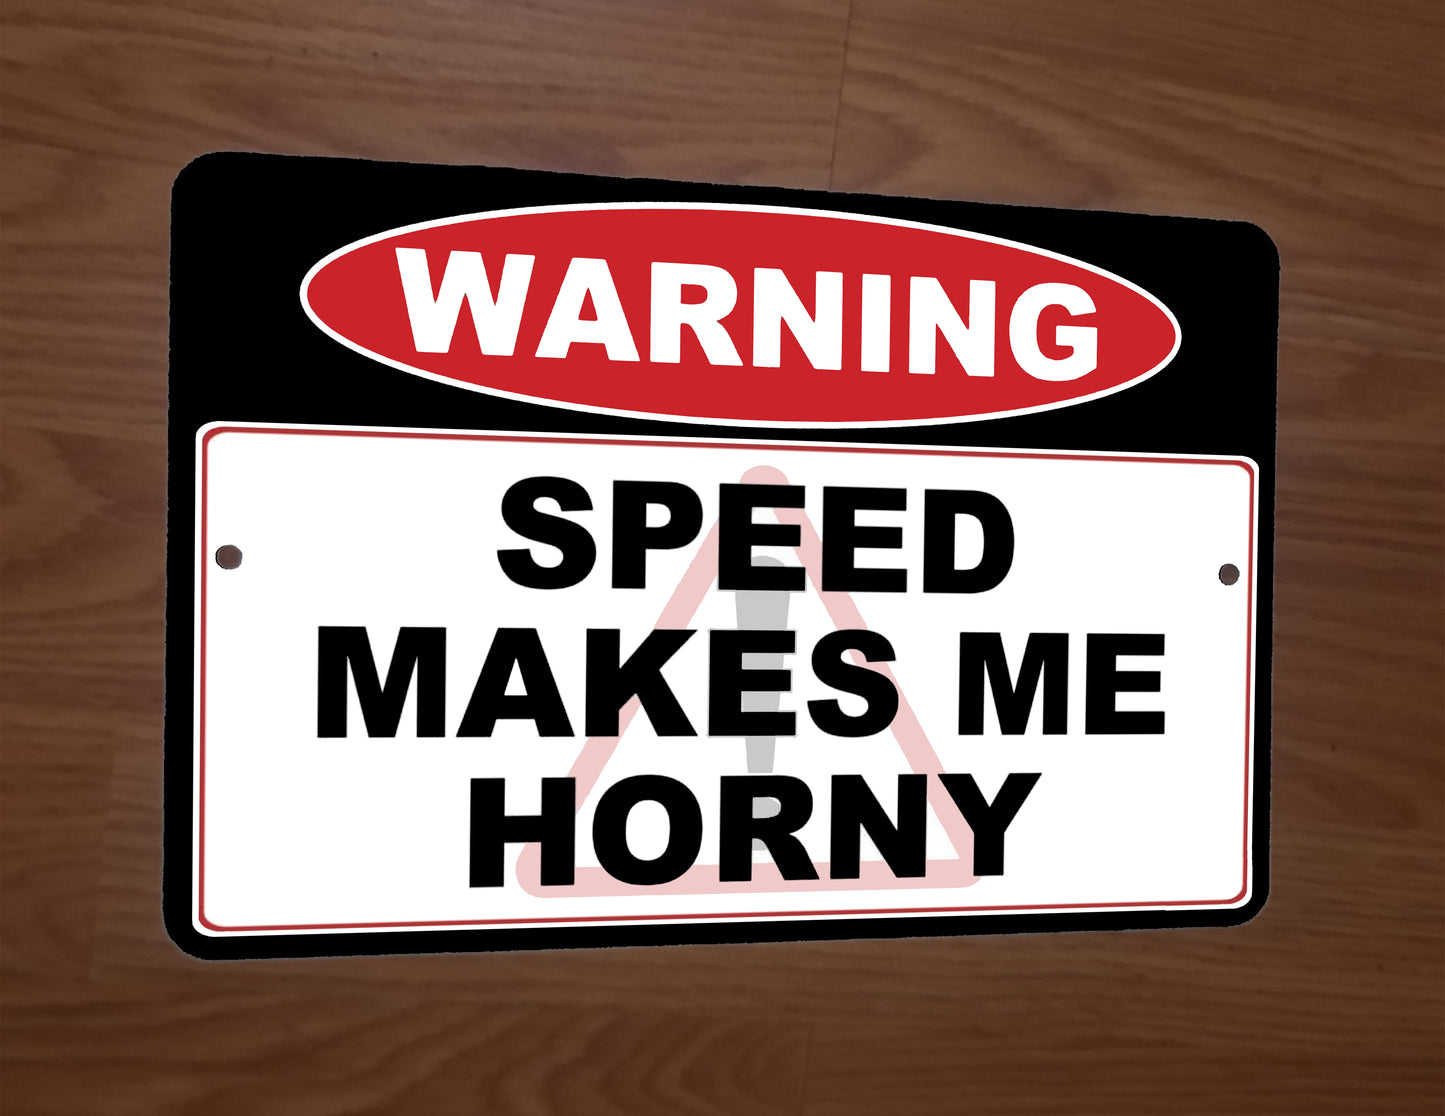 Warning Speed Makes Me Horny 8x12 Metal Wall Sign